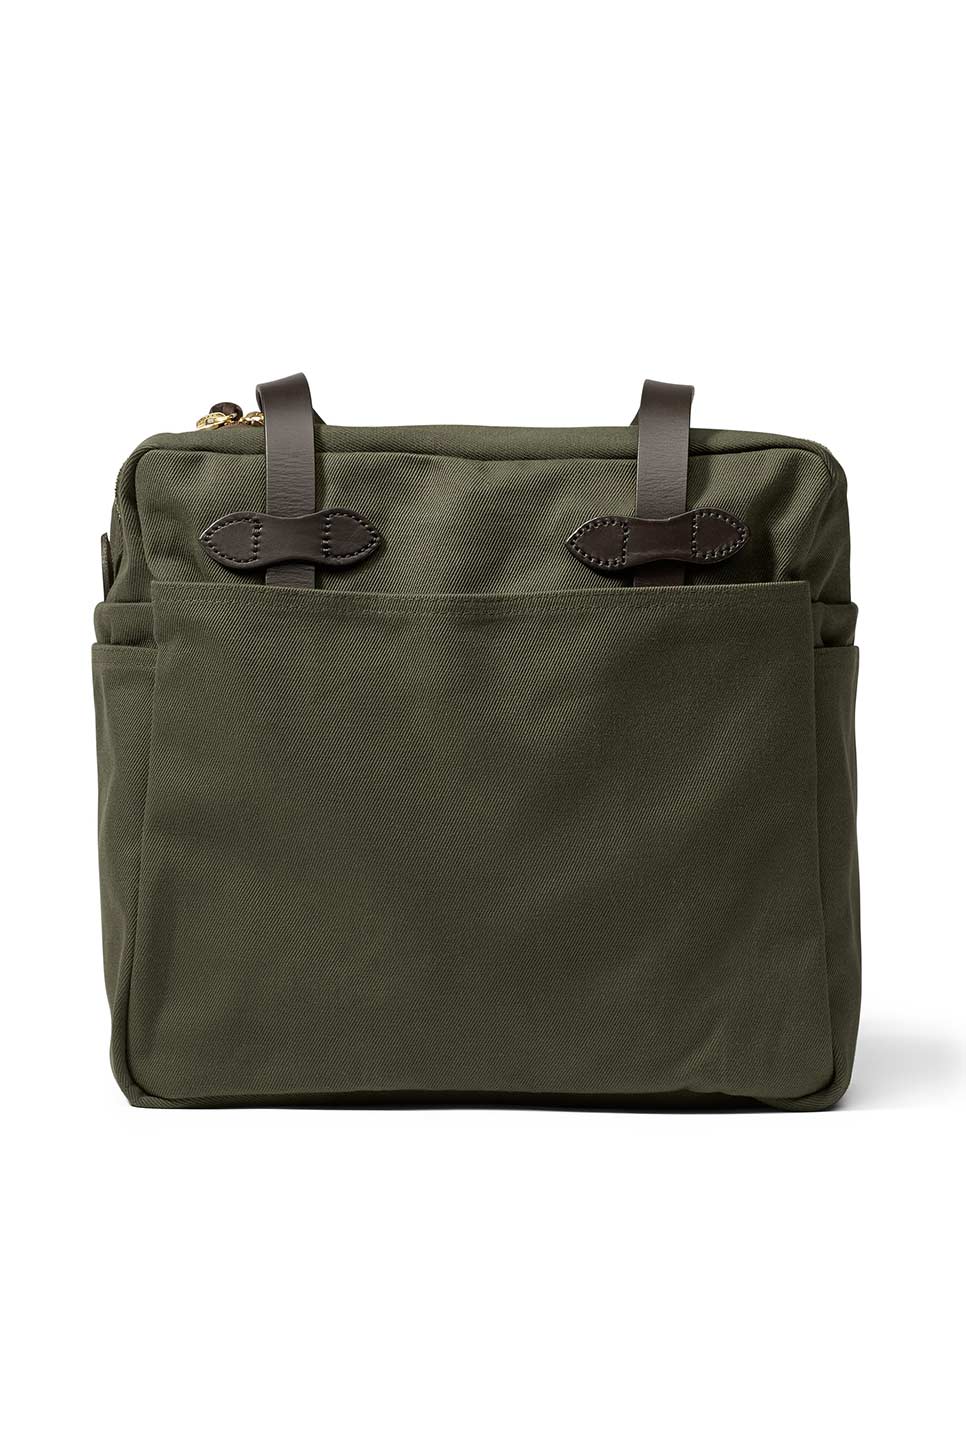 Filson - Tote Bag with Zipper - Otter Green - Back